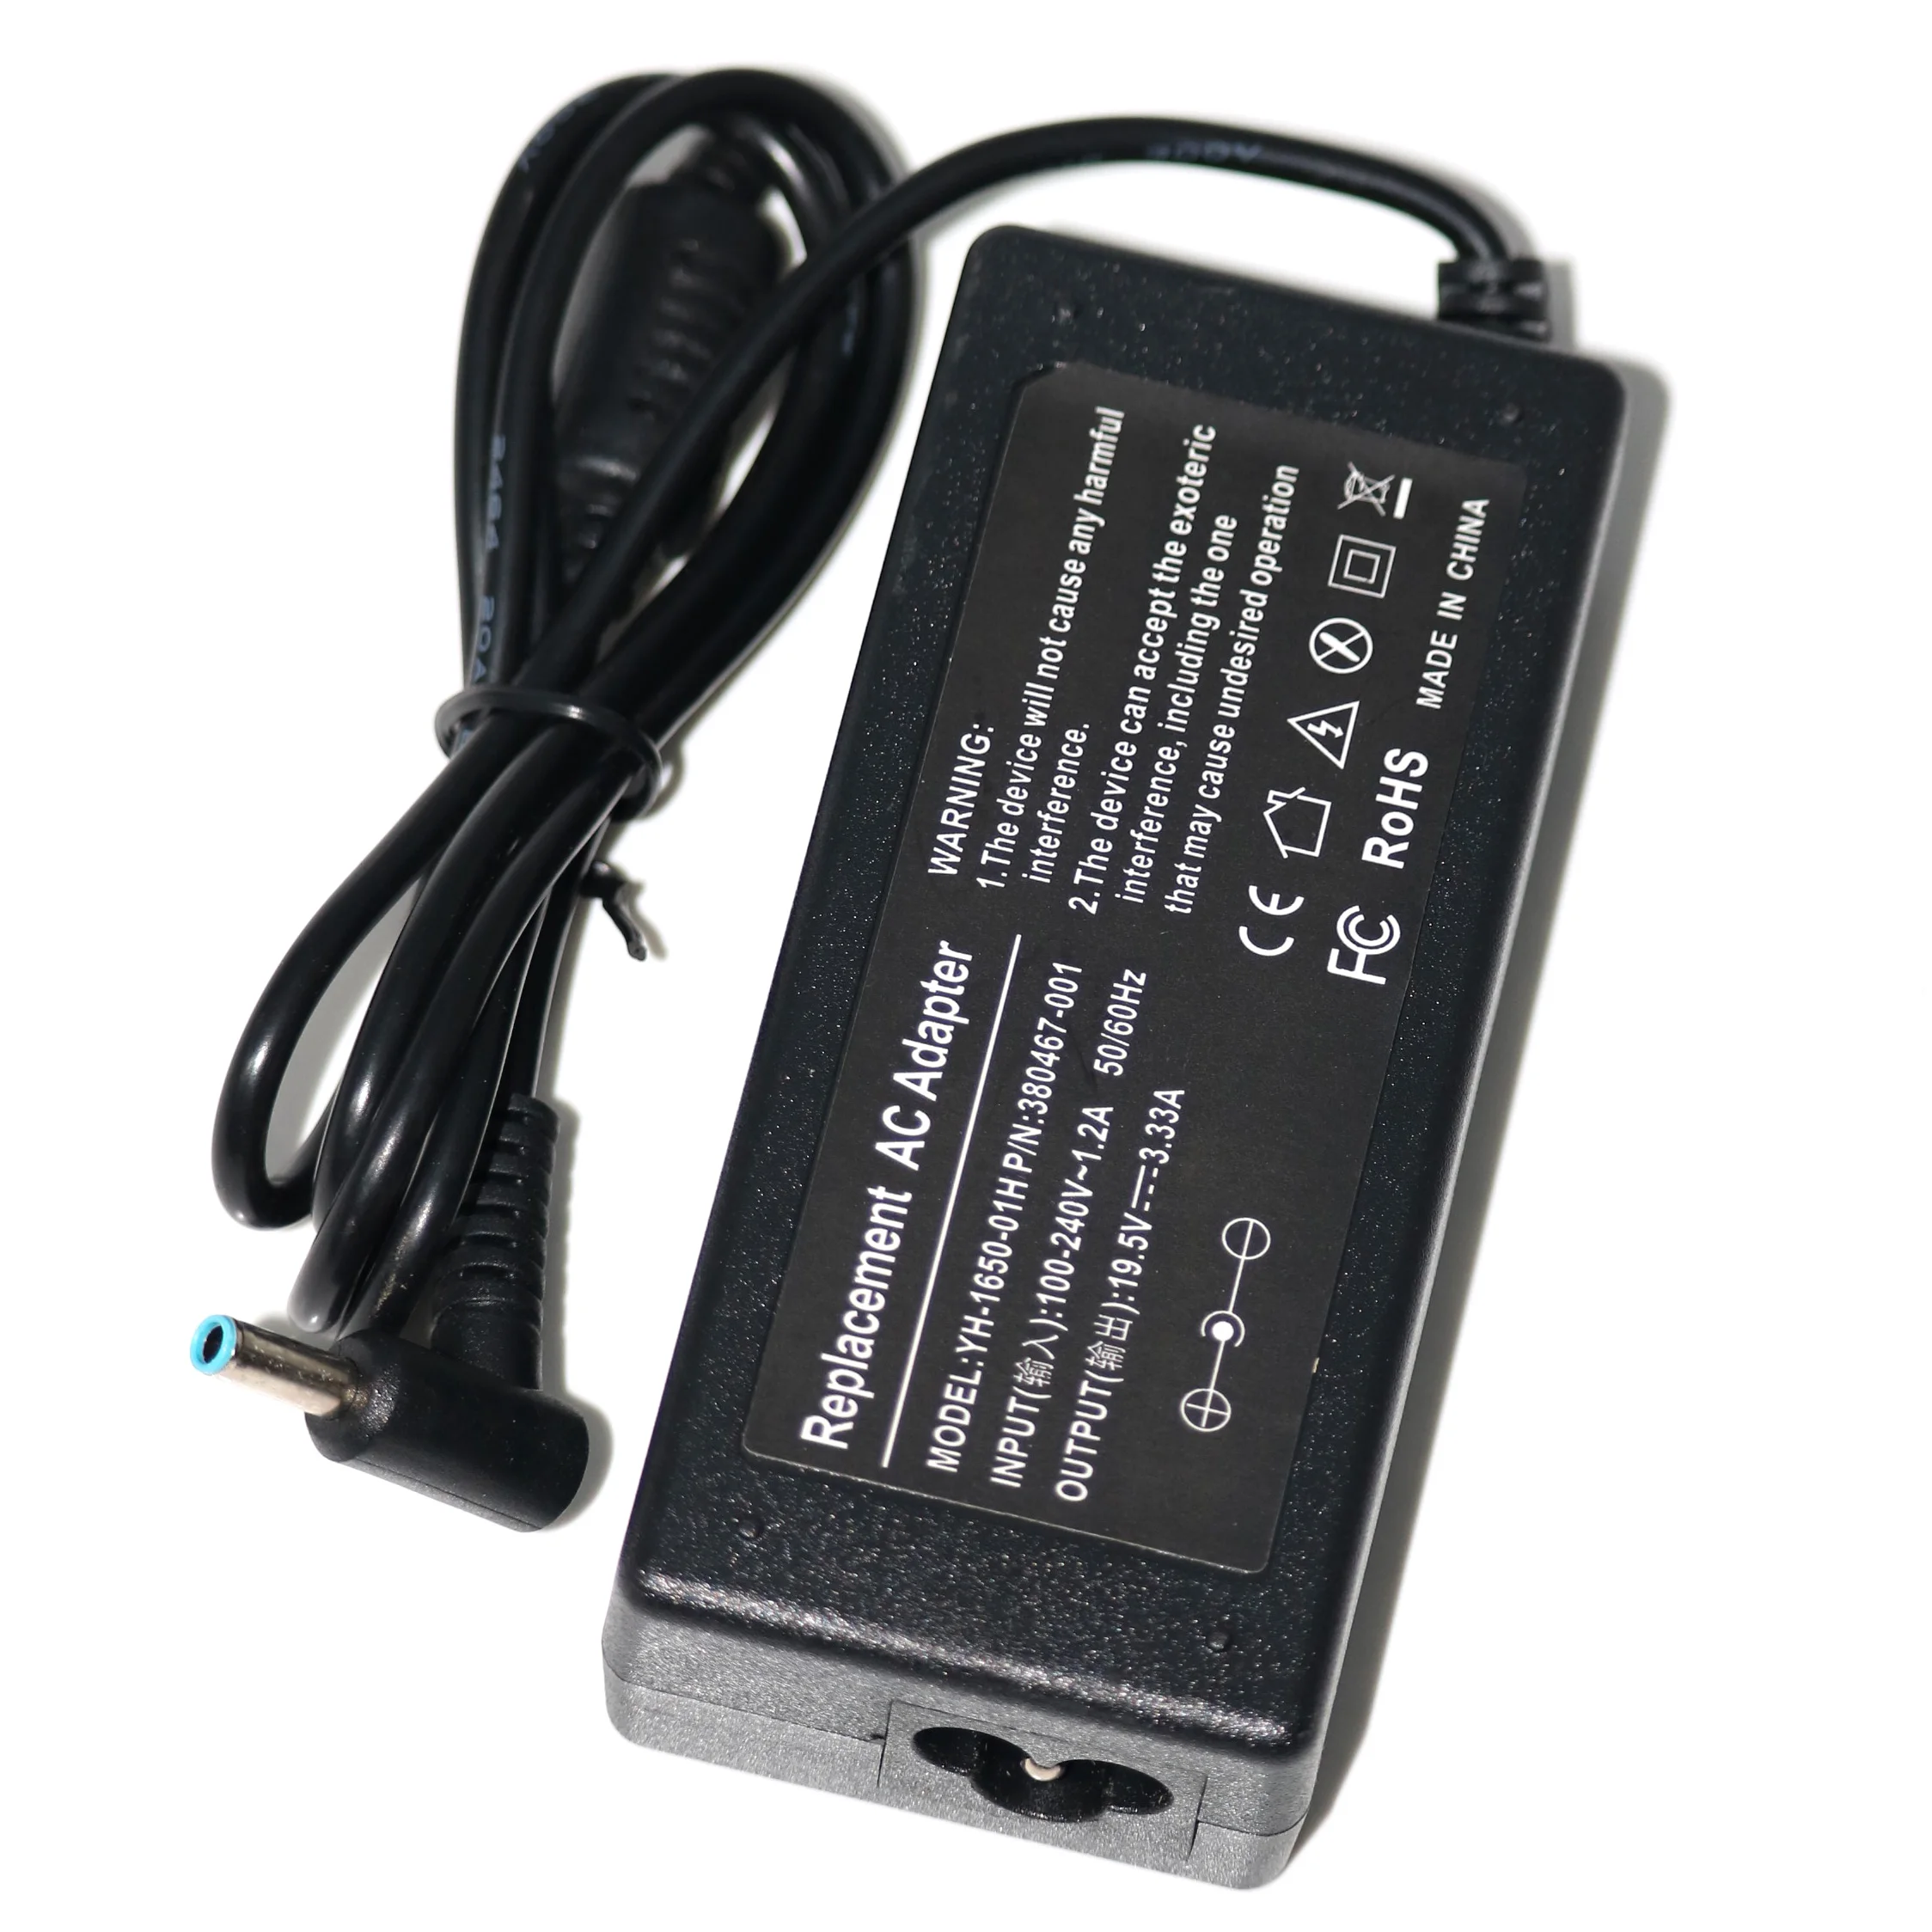 

19.5V 3.33A 65W Laptop AC Power Adapter Charger For HP 246 G3 246 G4 248 G1 250 G2 250 G3 250 G4 255 G2 255 G3 255 G4 256